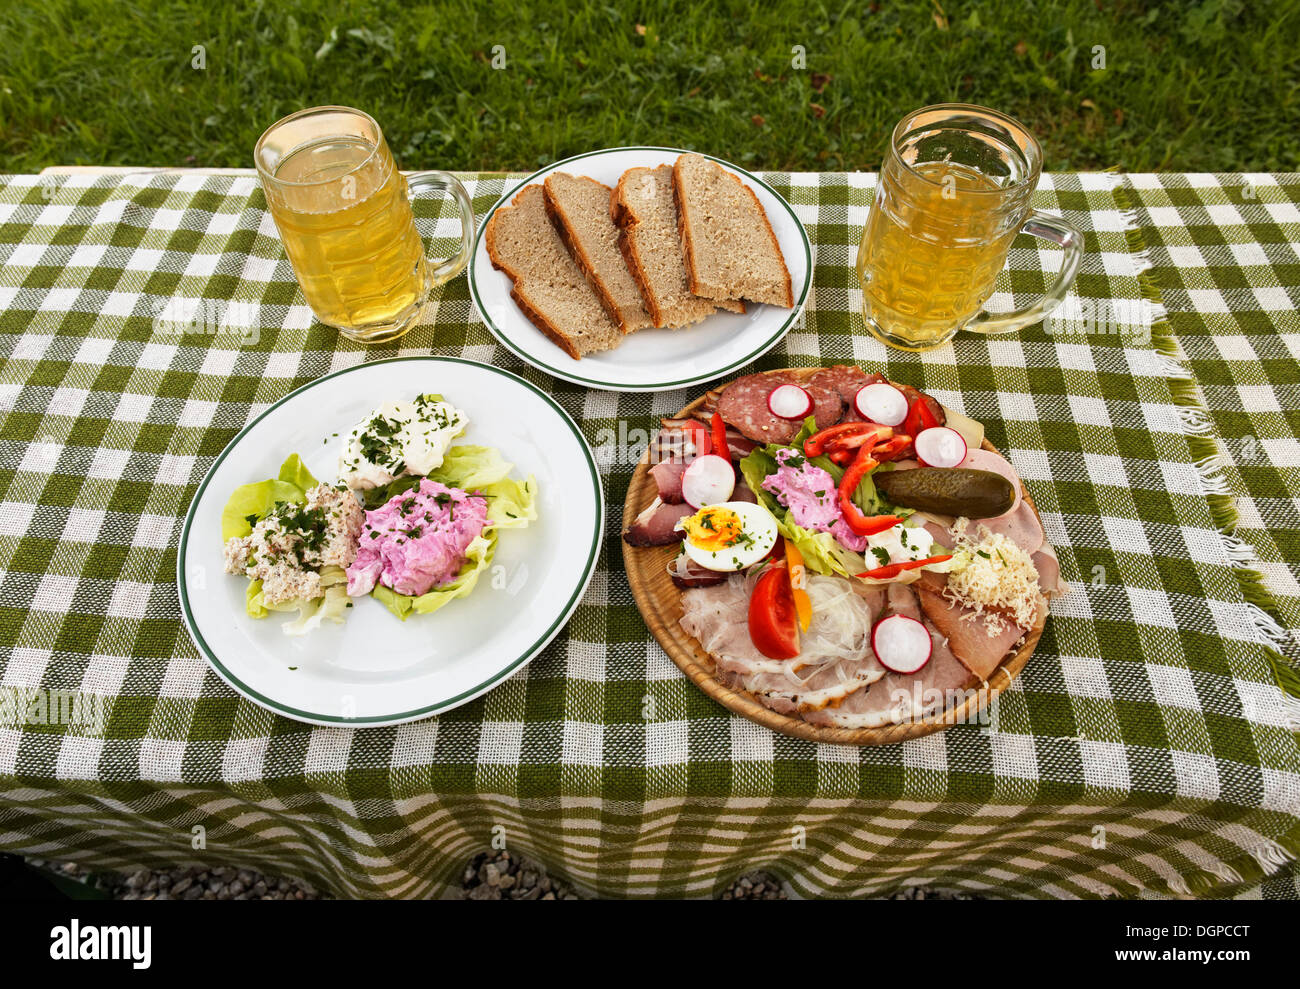 A sausage and cheese platter and some spread on a plate with two glasses of cider, young wine, near Gruenberg, Pyhrn-Eisenwurzen Stock Photo